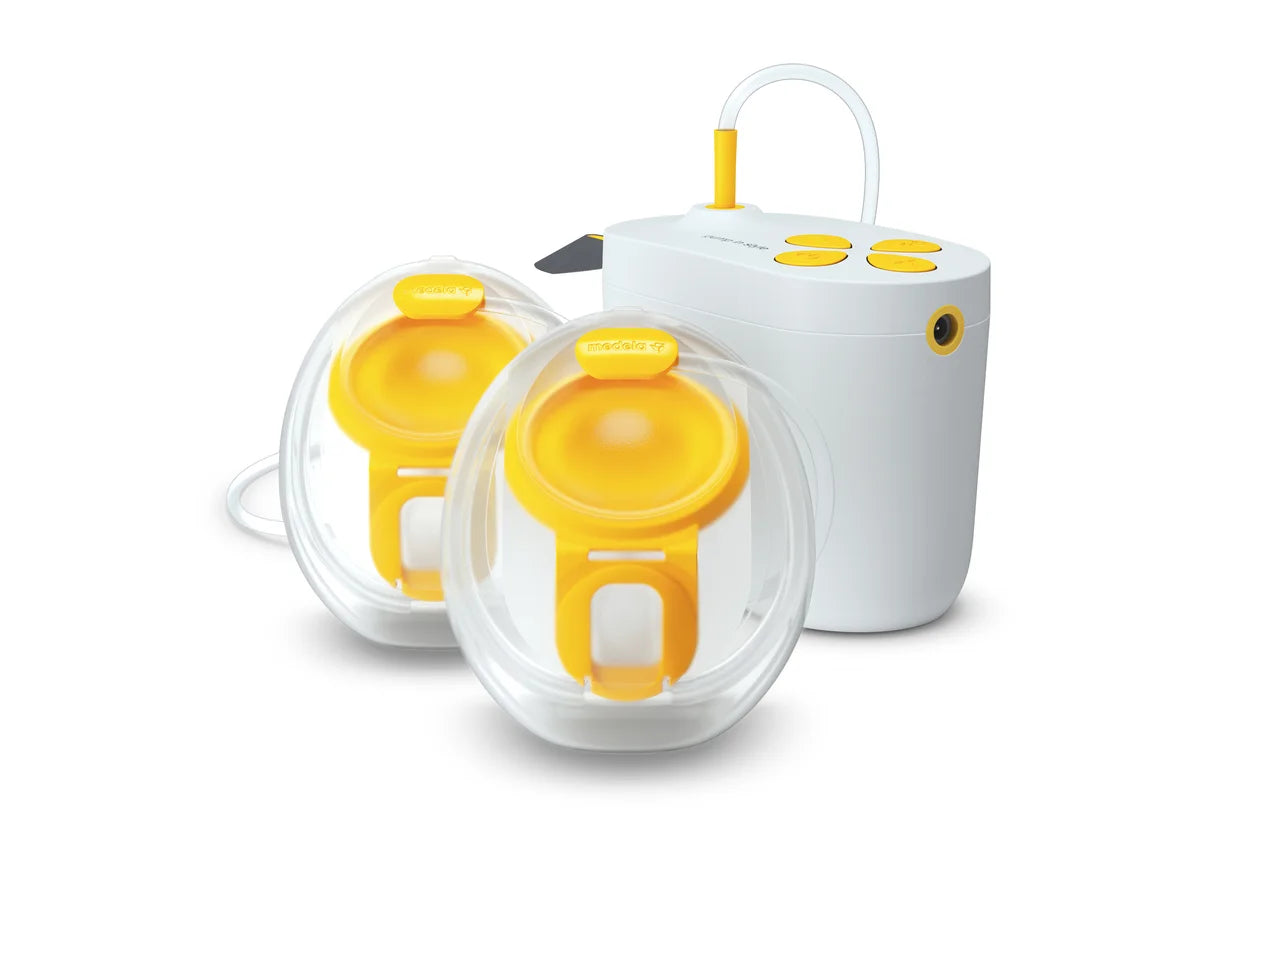 New Medela Pump In Style Max Flow Hands-free Double Electric Breast Pump